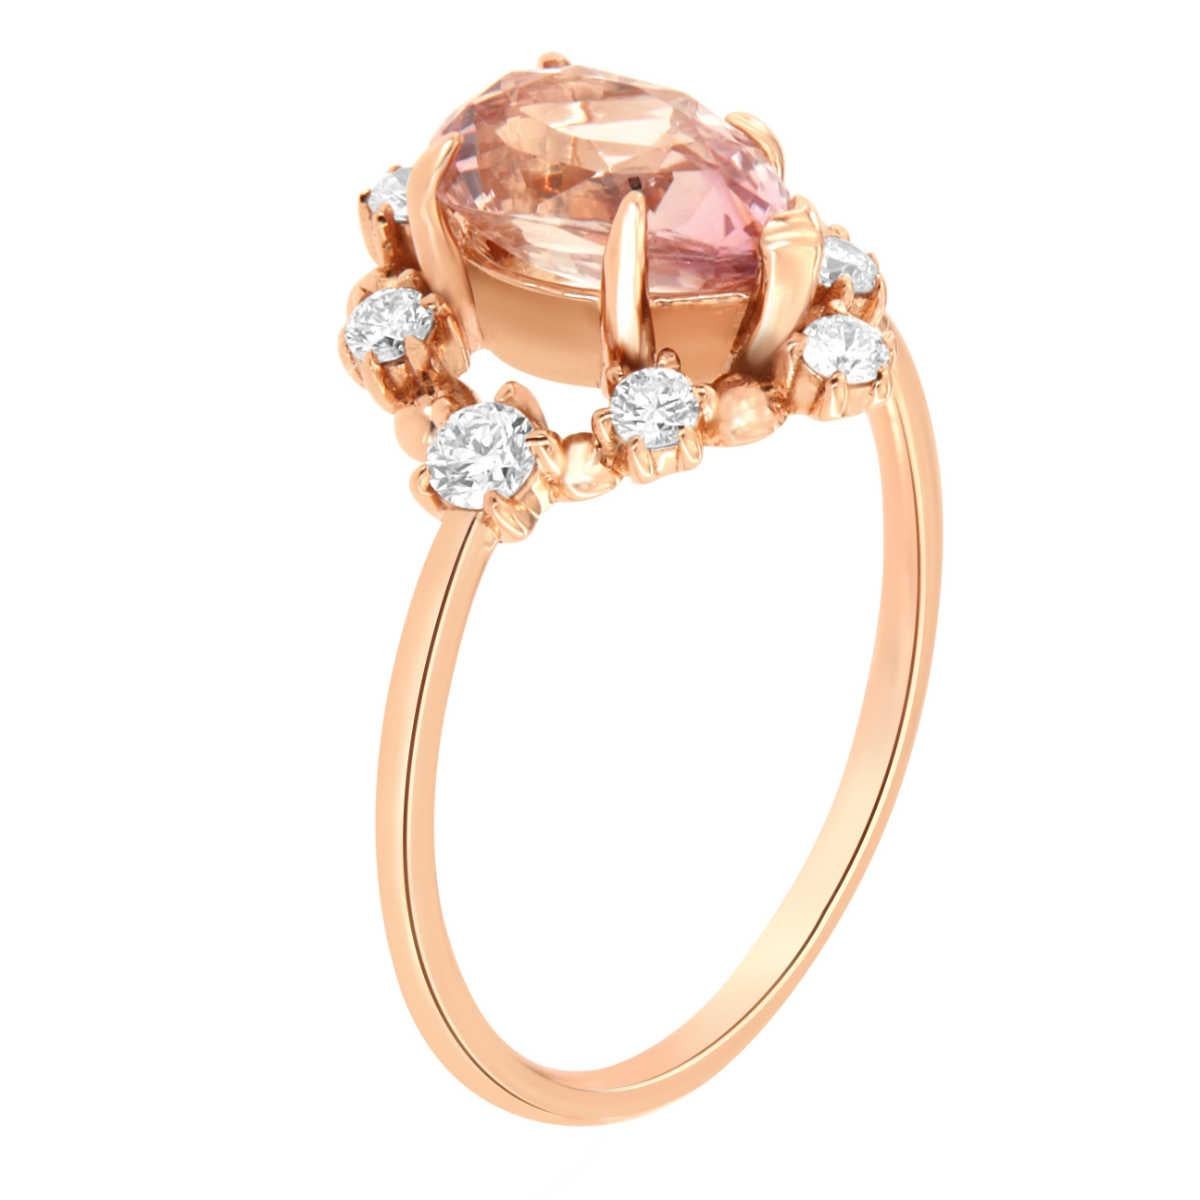 This delicate 14k yellow gold ring features a GIA-certified 1.71 Carat Rare Sri- Lankan Natural Pink sapphire Pear-shaped encircled by a halo of eight (8) brilliant round diamonds in a total of 0.31 carat. The diamonds are G in color and SI1 in